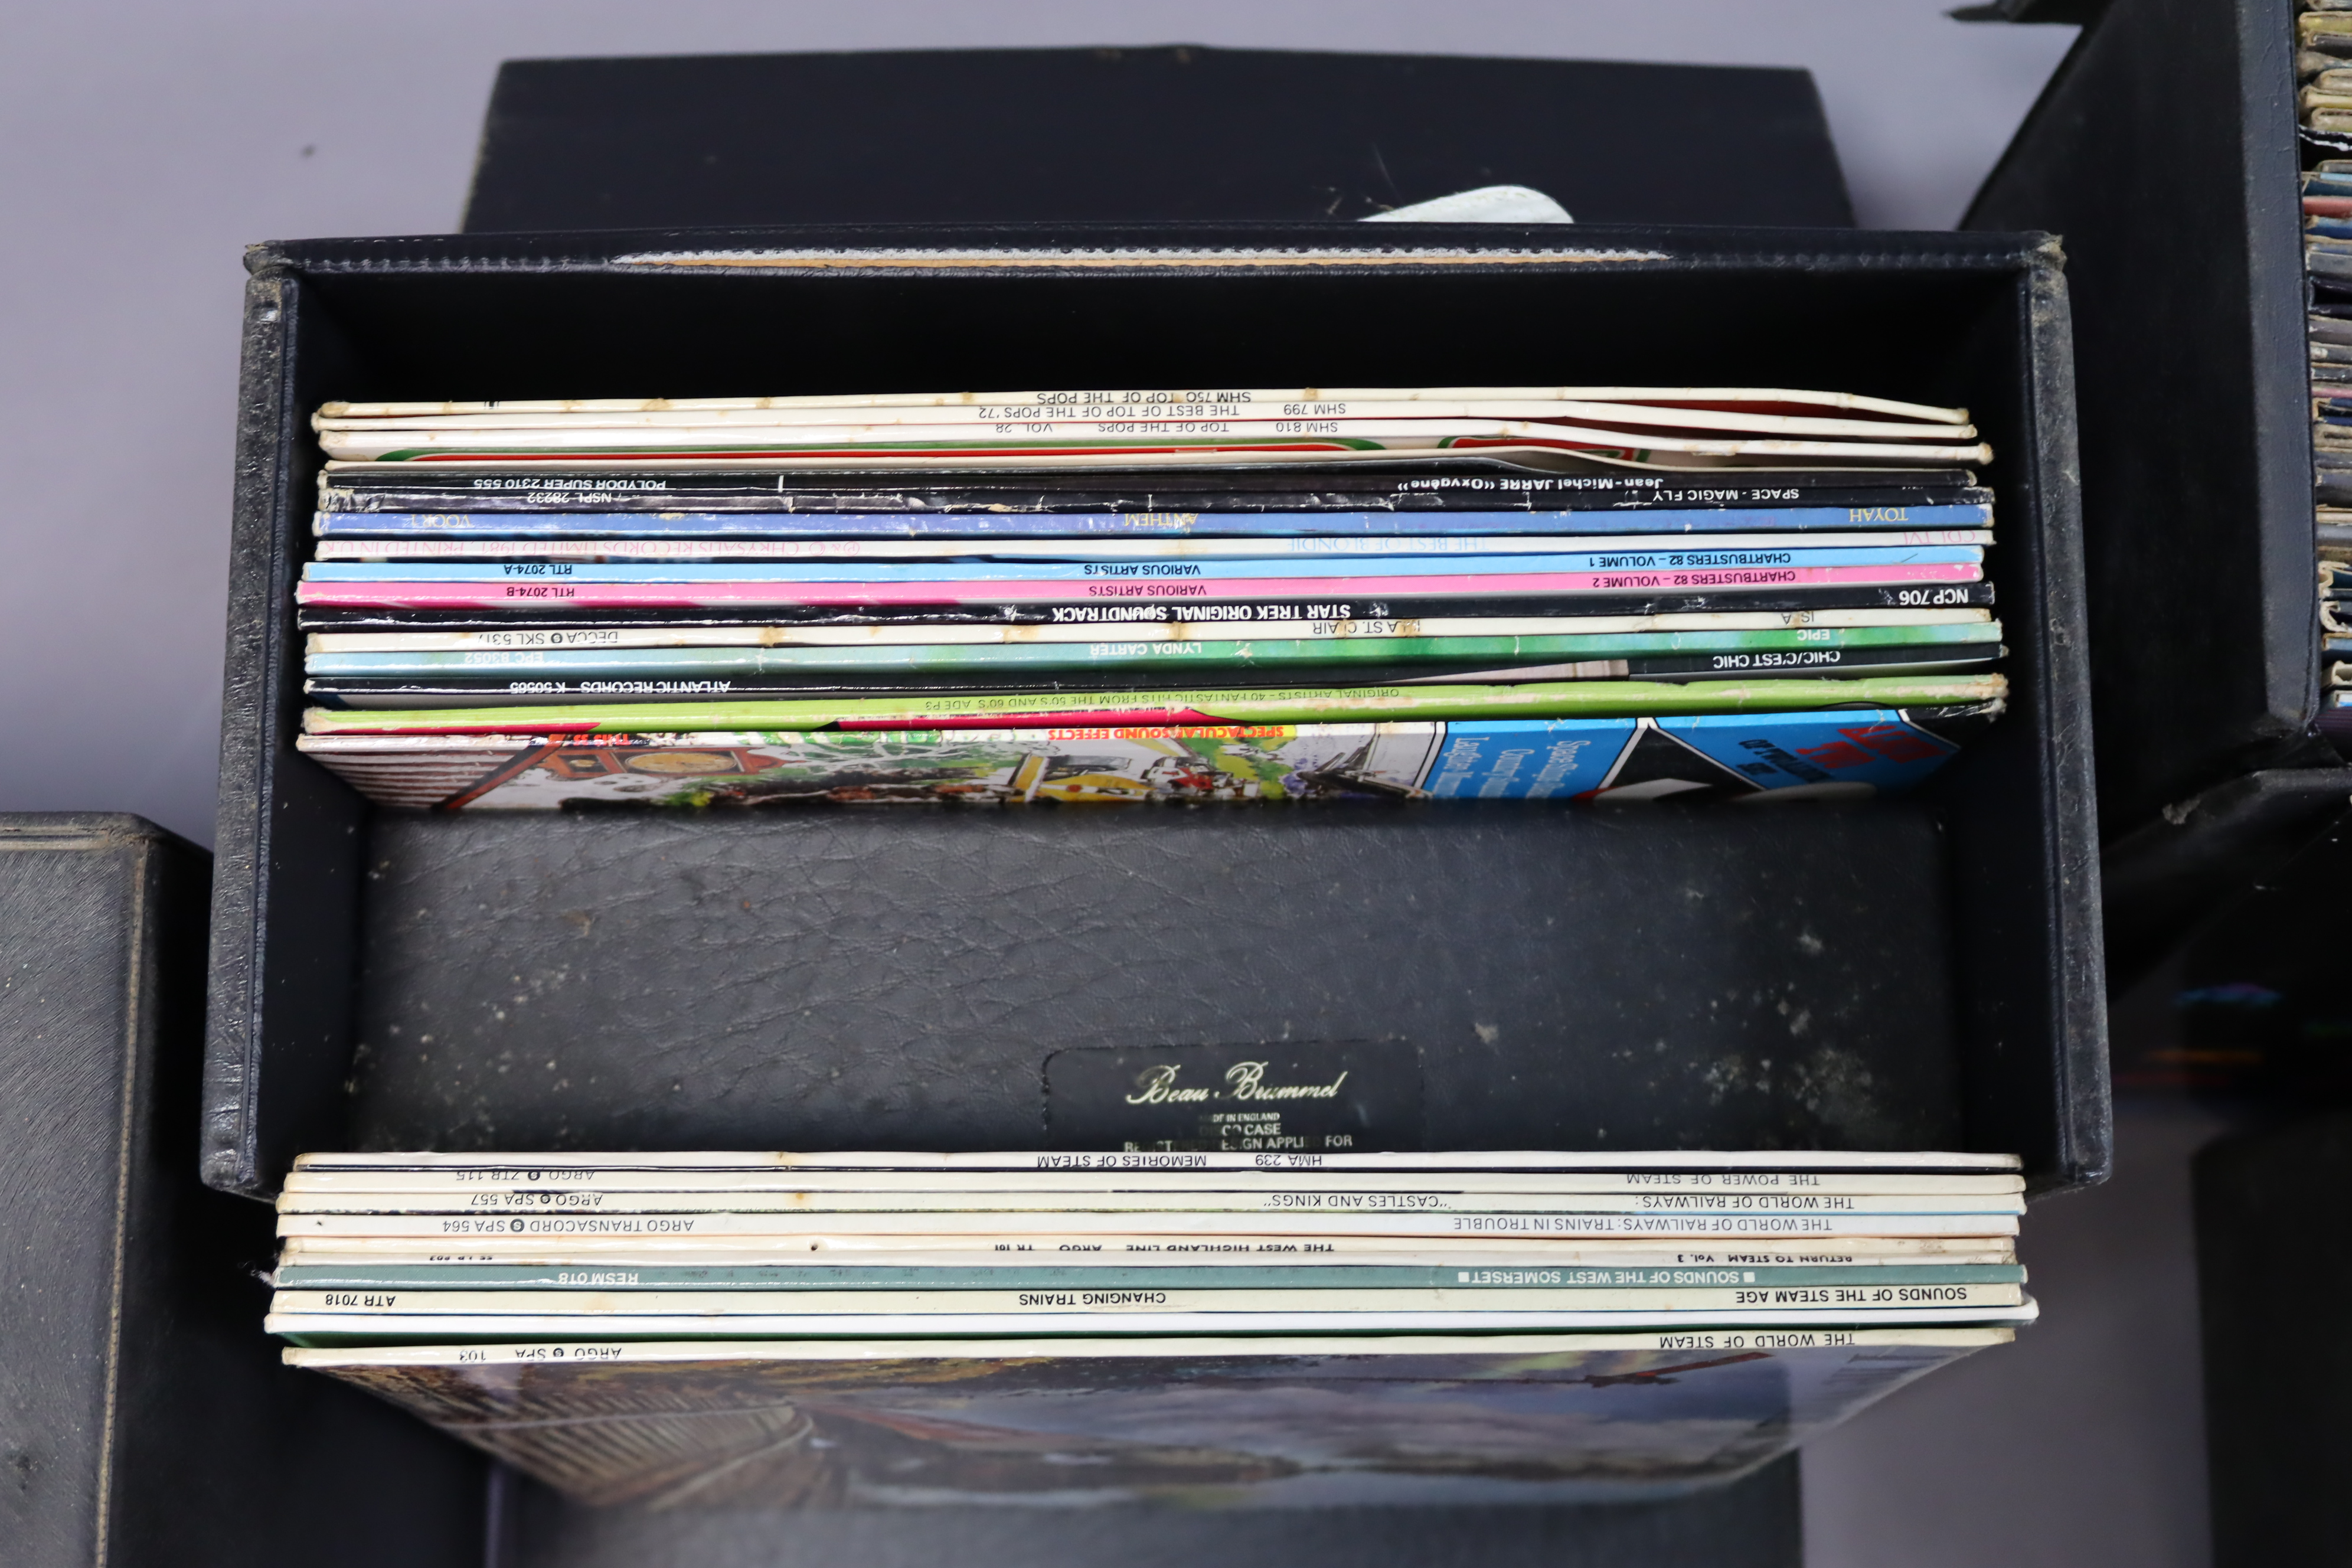 Approximately one hundred various records – pop, classical, etc. - Image 4 of 6